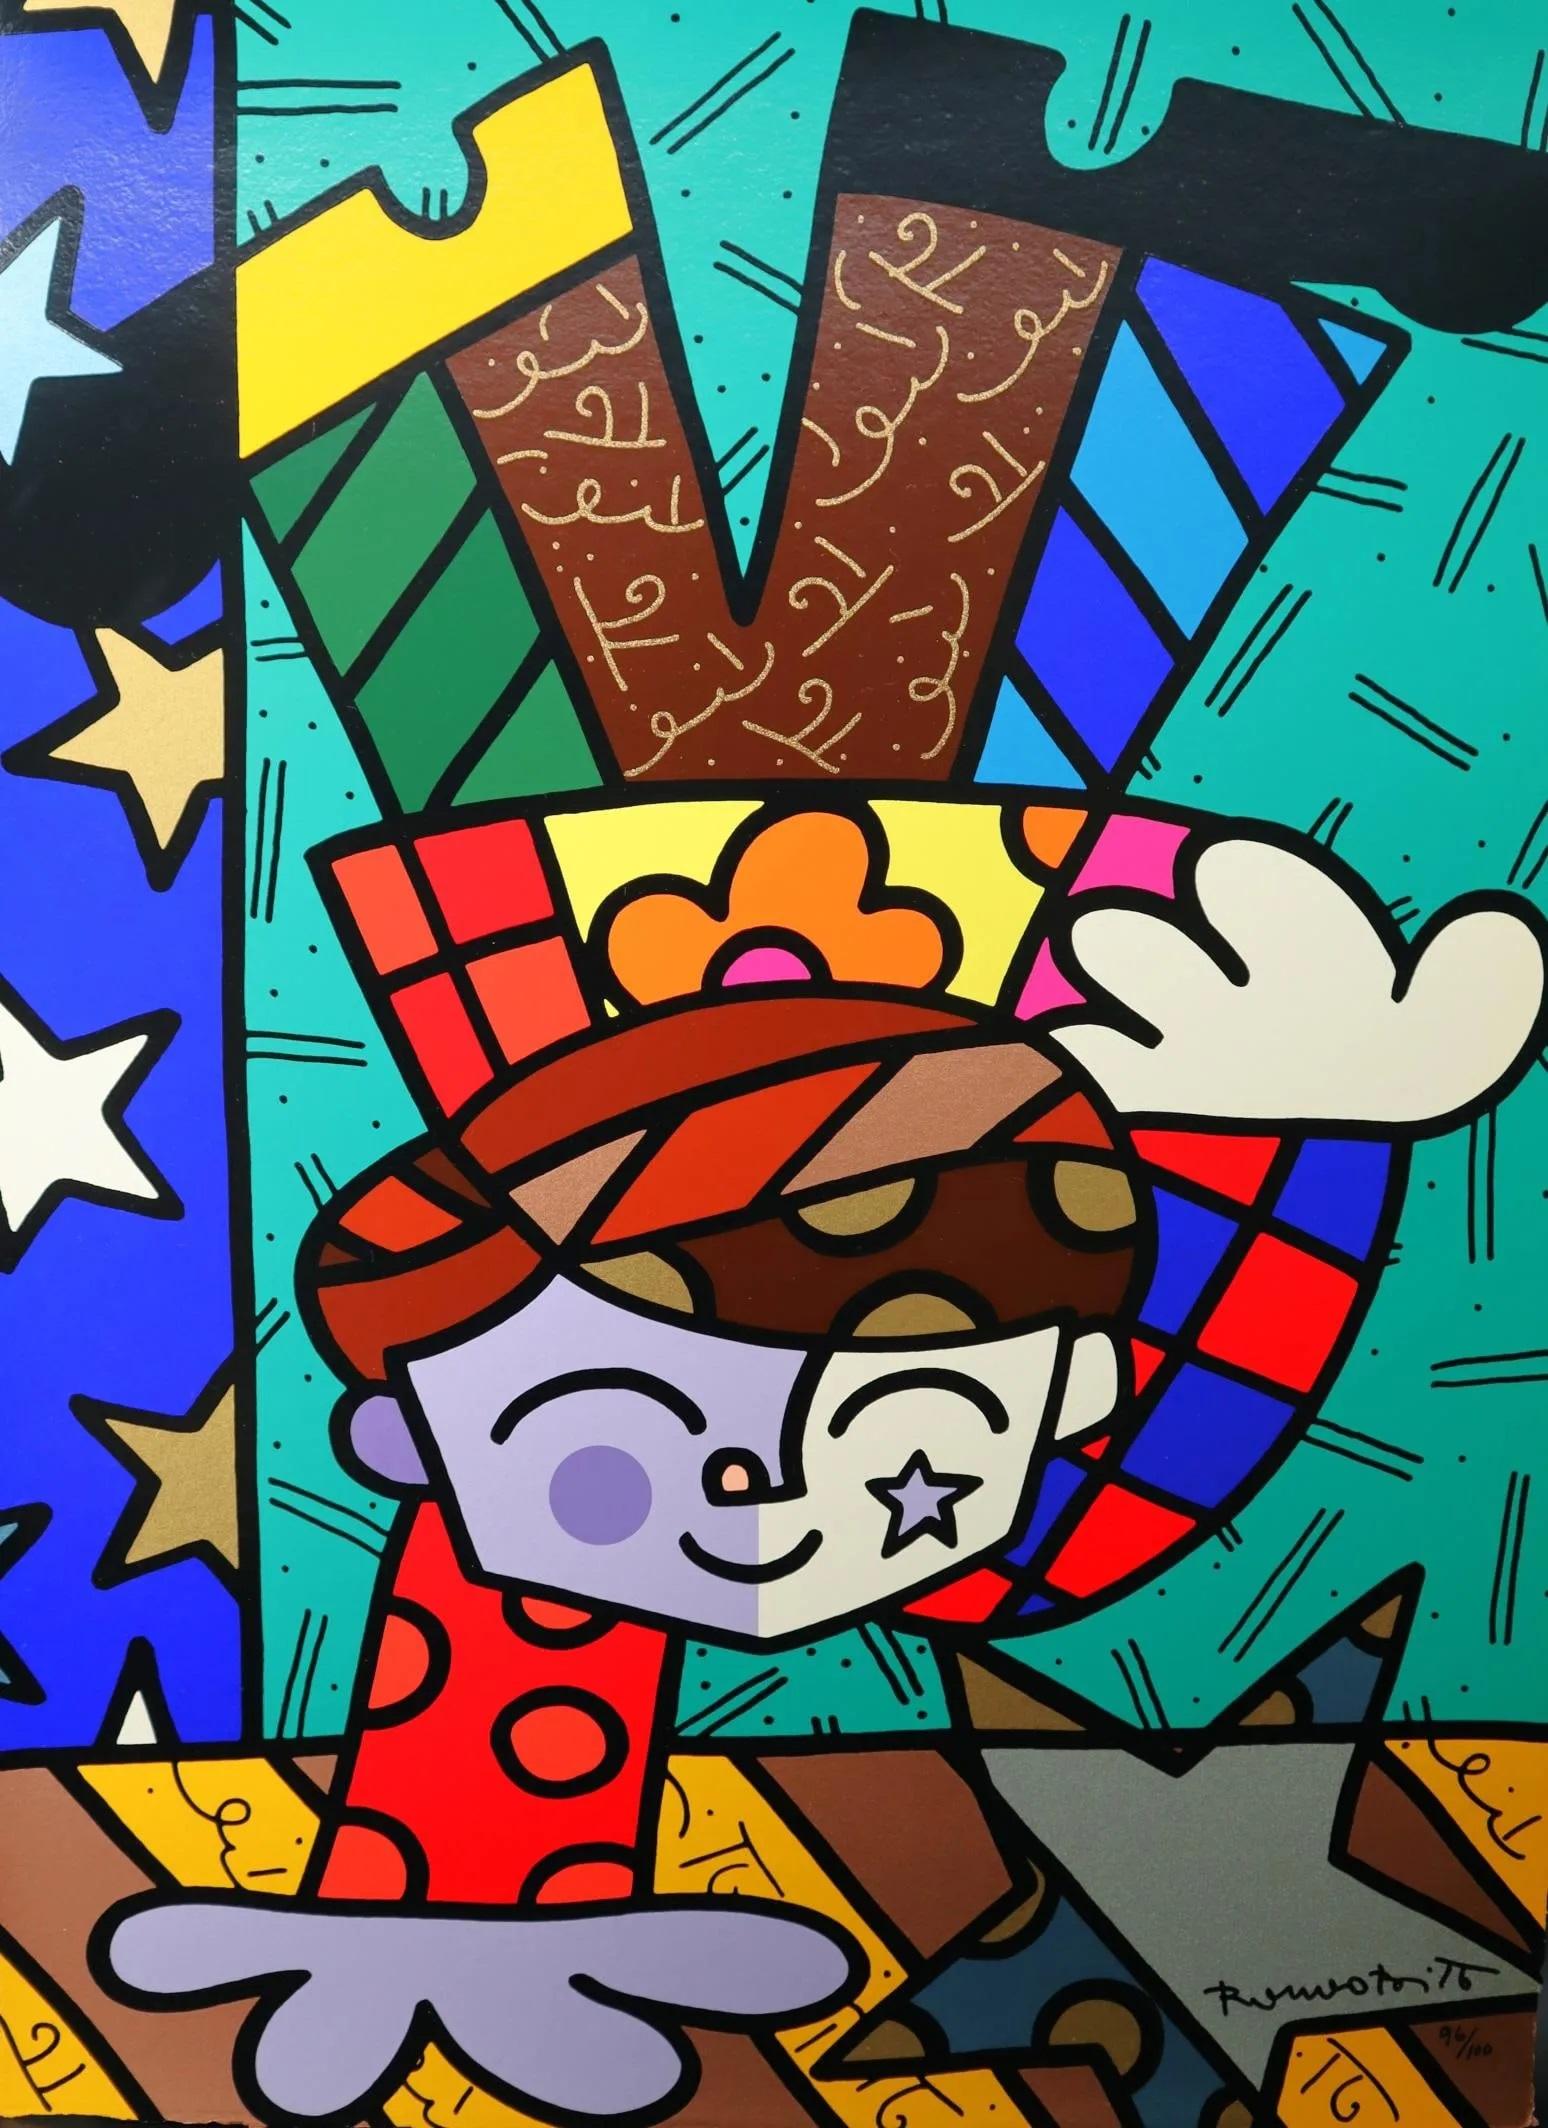 Romero Britto
"Upsidedown Too".
Screenprint on paper
Signed lower left R. Britto & numbered 96/100.
Approx: 24" x 18" in.

Condition: In excellent condition

Romero Britto Brazilian Artist: Britto's work captures the attention of both youthful